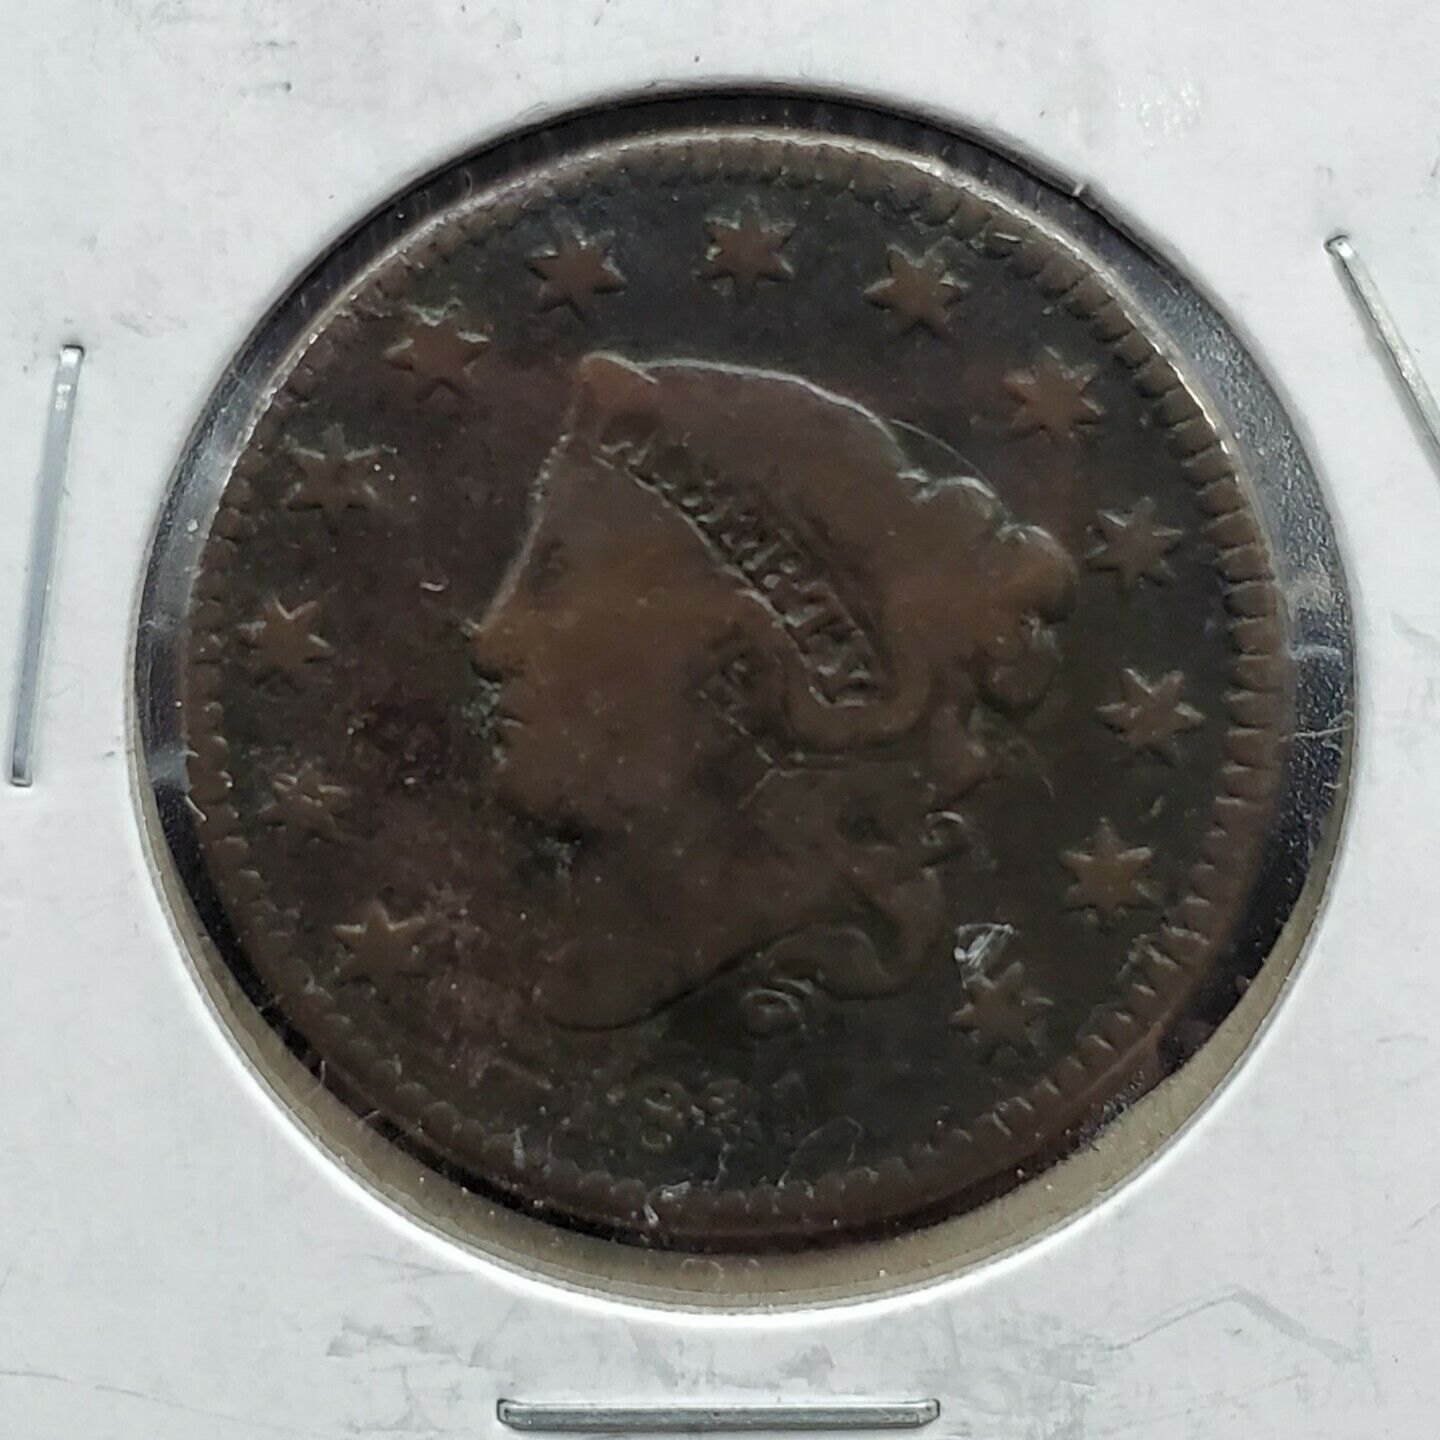 1831 Coronet Liberty Head US Large Cent 1c Choice Fine Circulated Condition